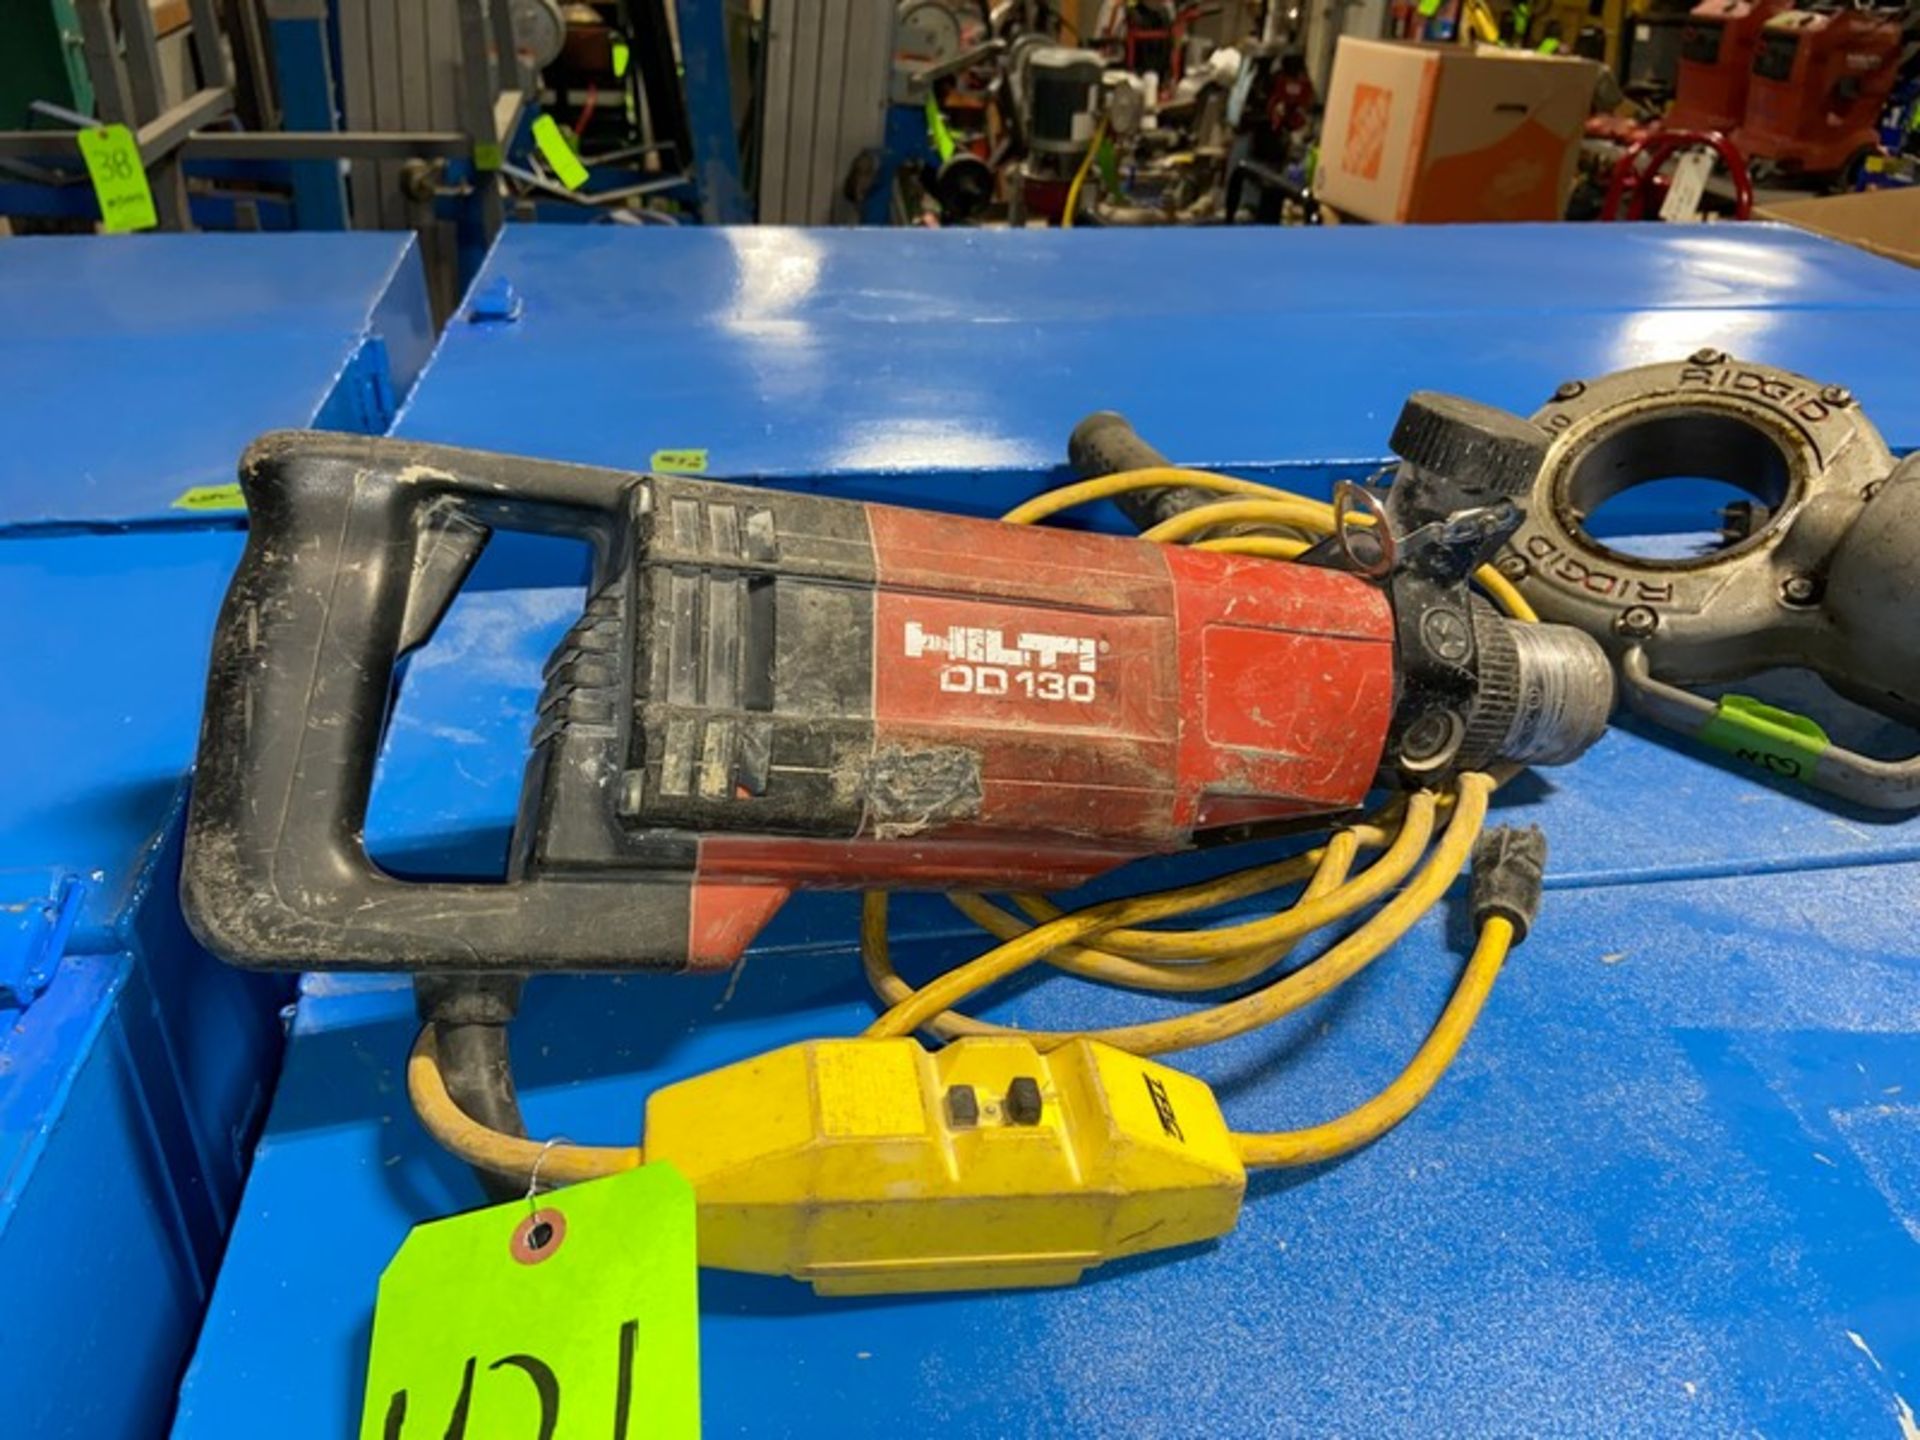 HILTI Diamond Drill Tool, M/N DD-130, with Power Cord (LOCATED IN MONROEVILLE, PA)